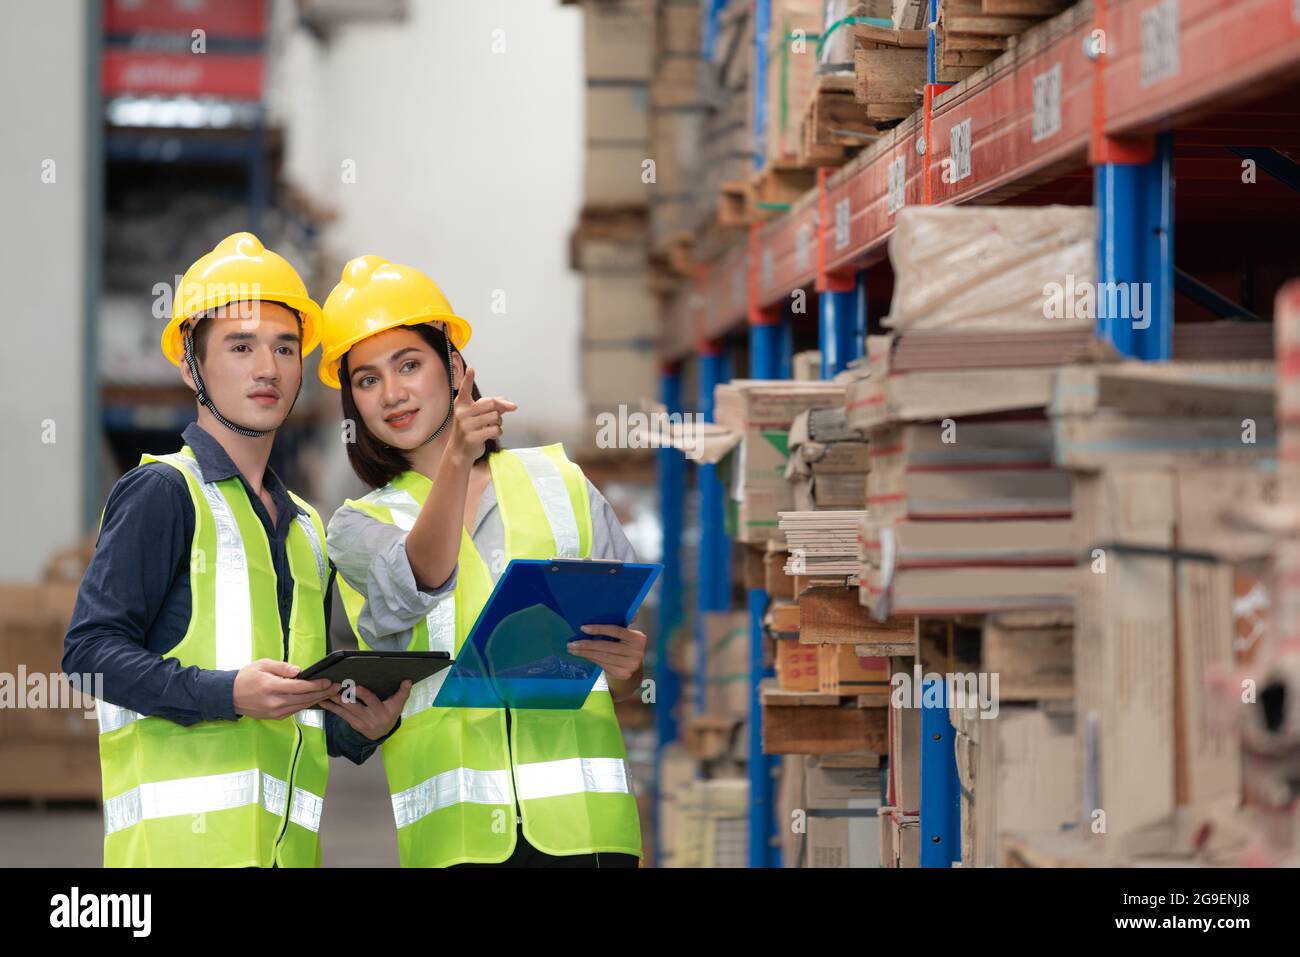 Warehouse worker checking packages on shelf in a large store Stock Photo